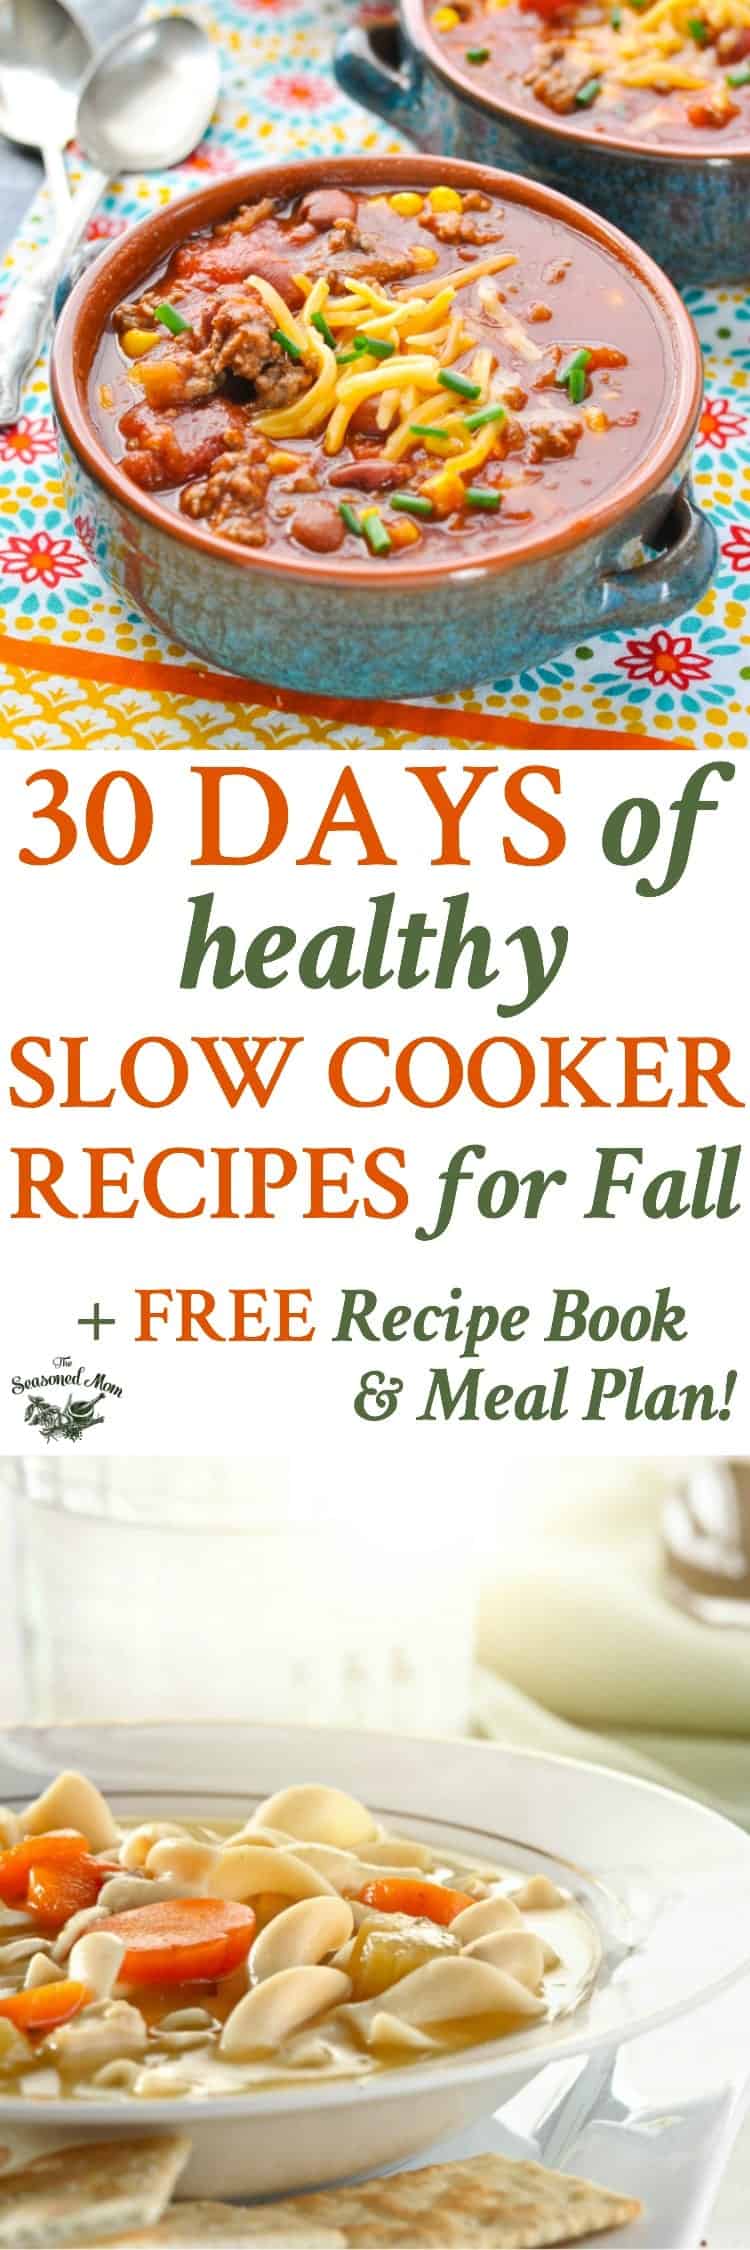 30 Days of Healthy Slow Cooker Recipes for Fall - The Seasoned Mom